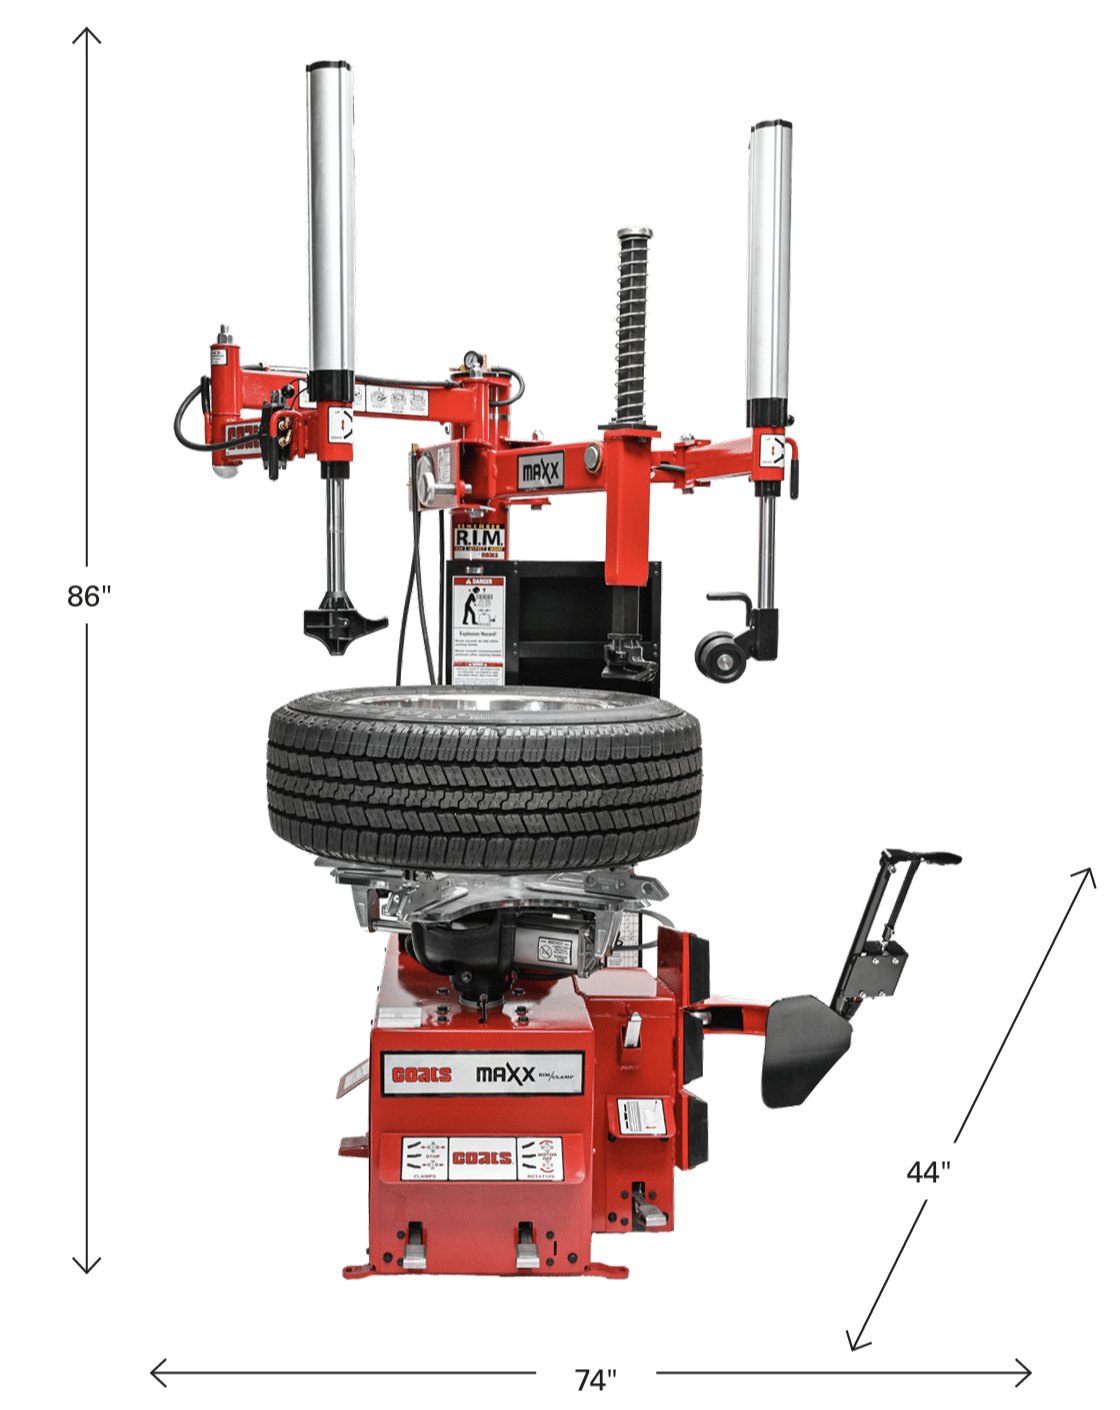 Front diagram of a Maxx 90 showing height, width, and length, dimensions